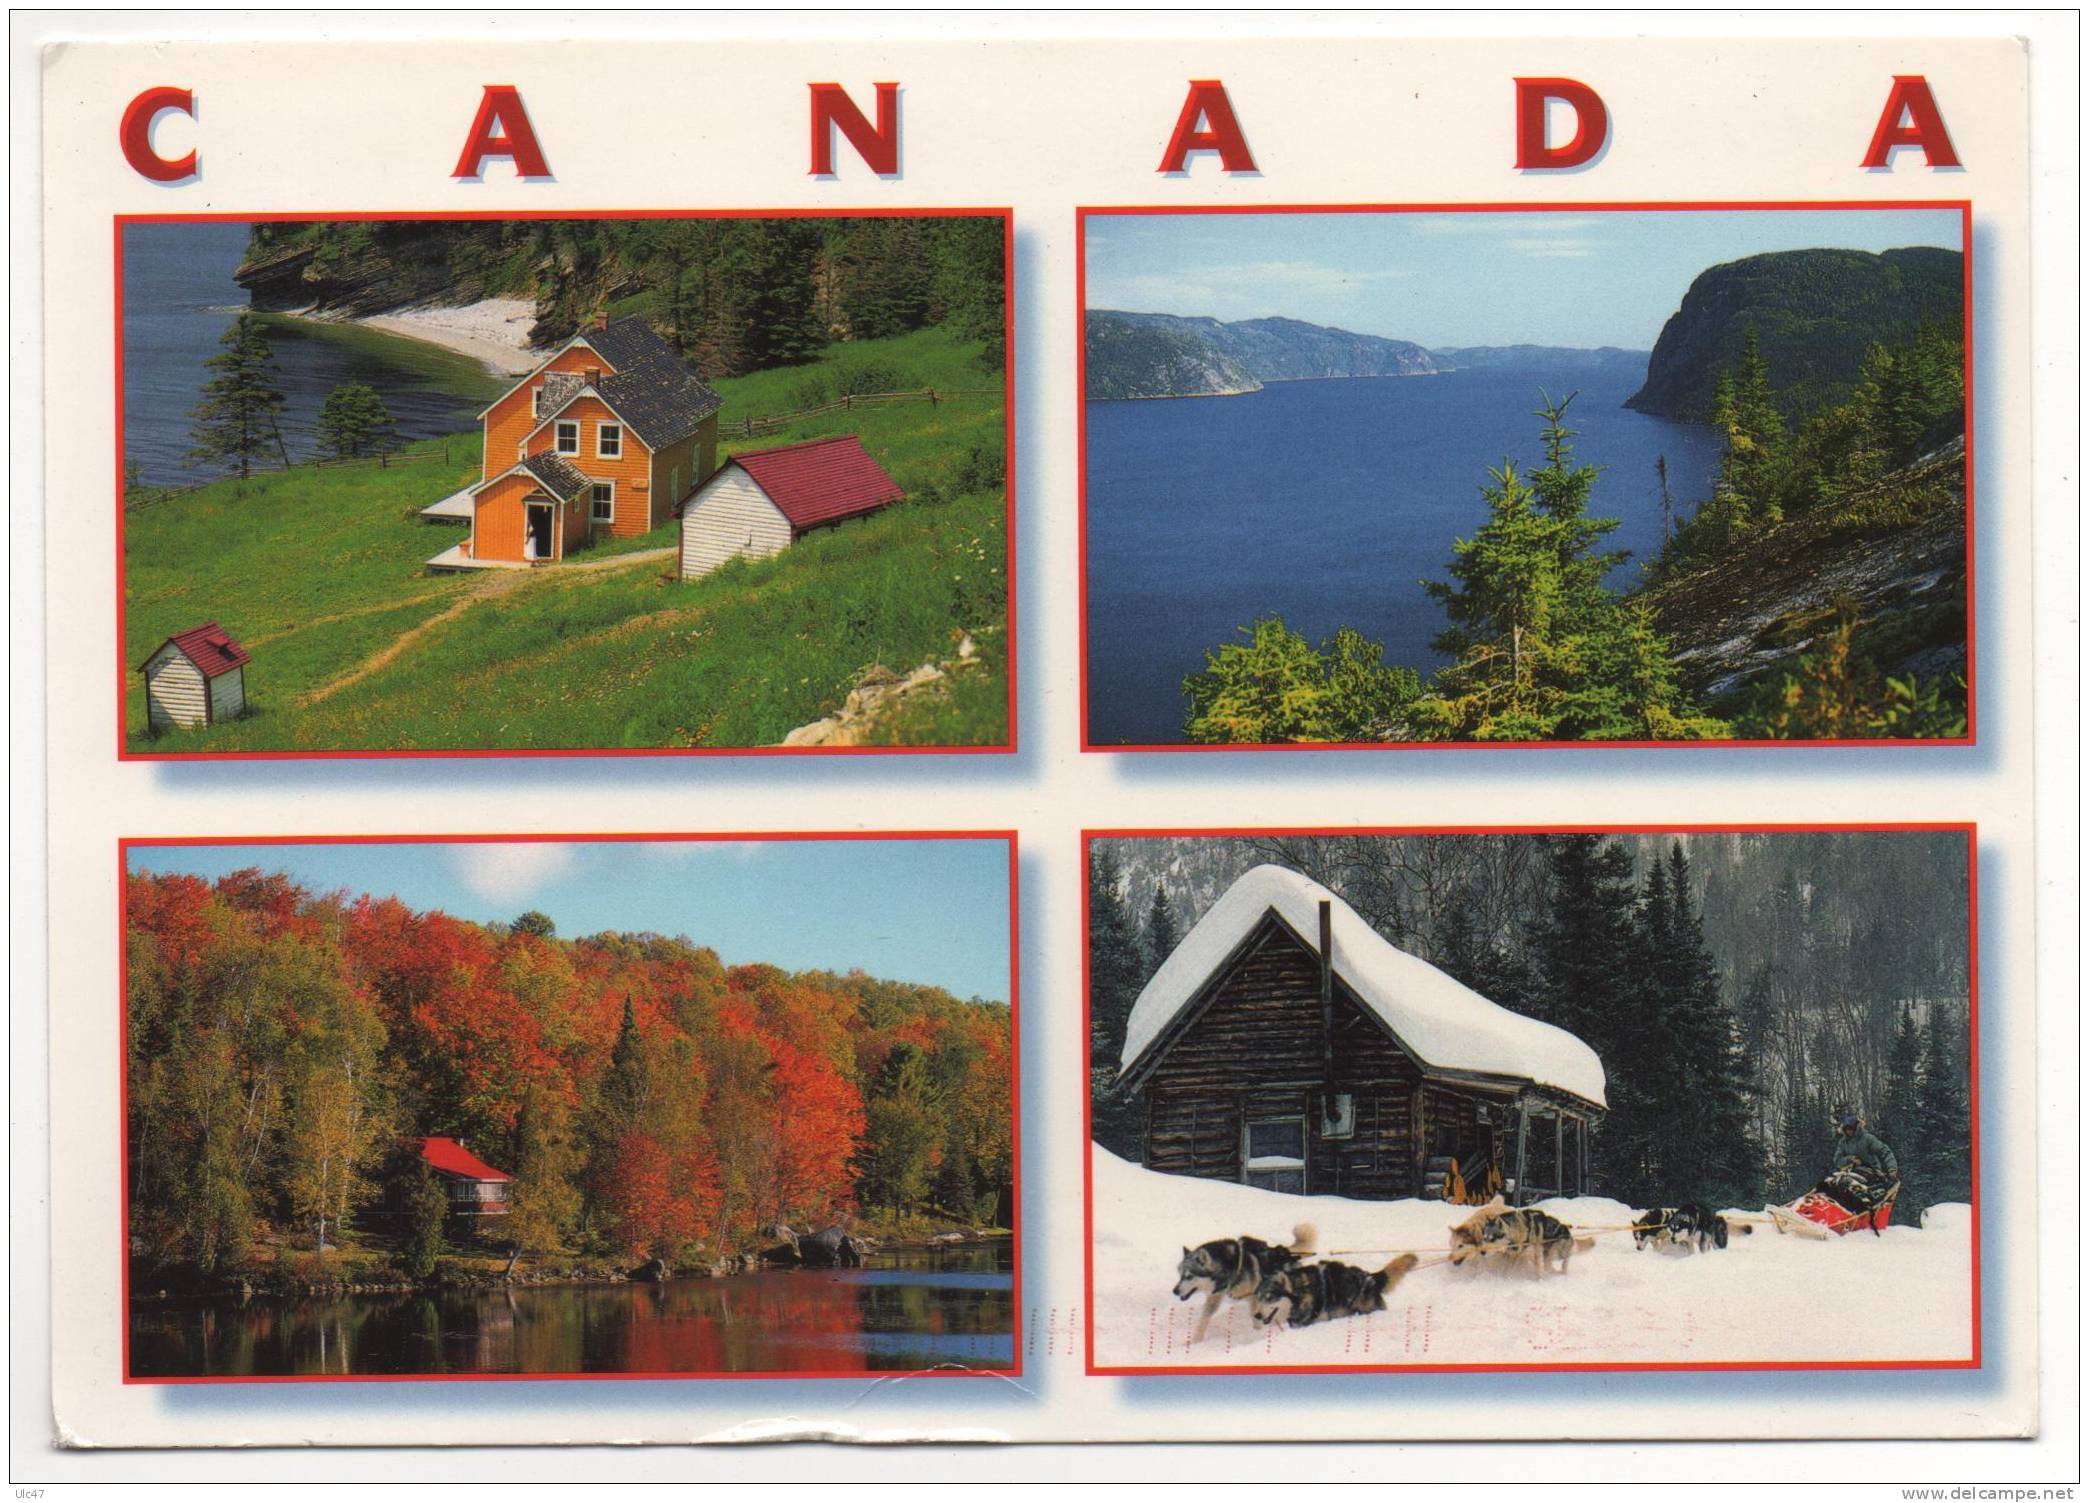 - CANADA. - SCENICS, CONTRASTS AND SEASONS.   - (17x12 Cm.) - - Modern Cards